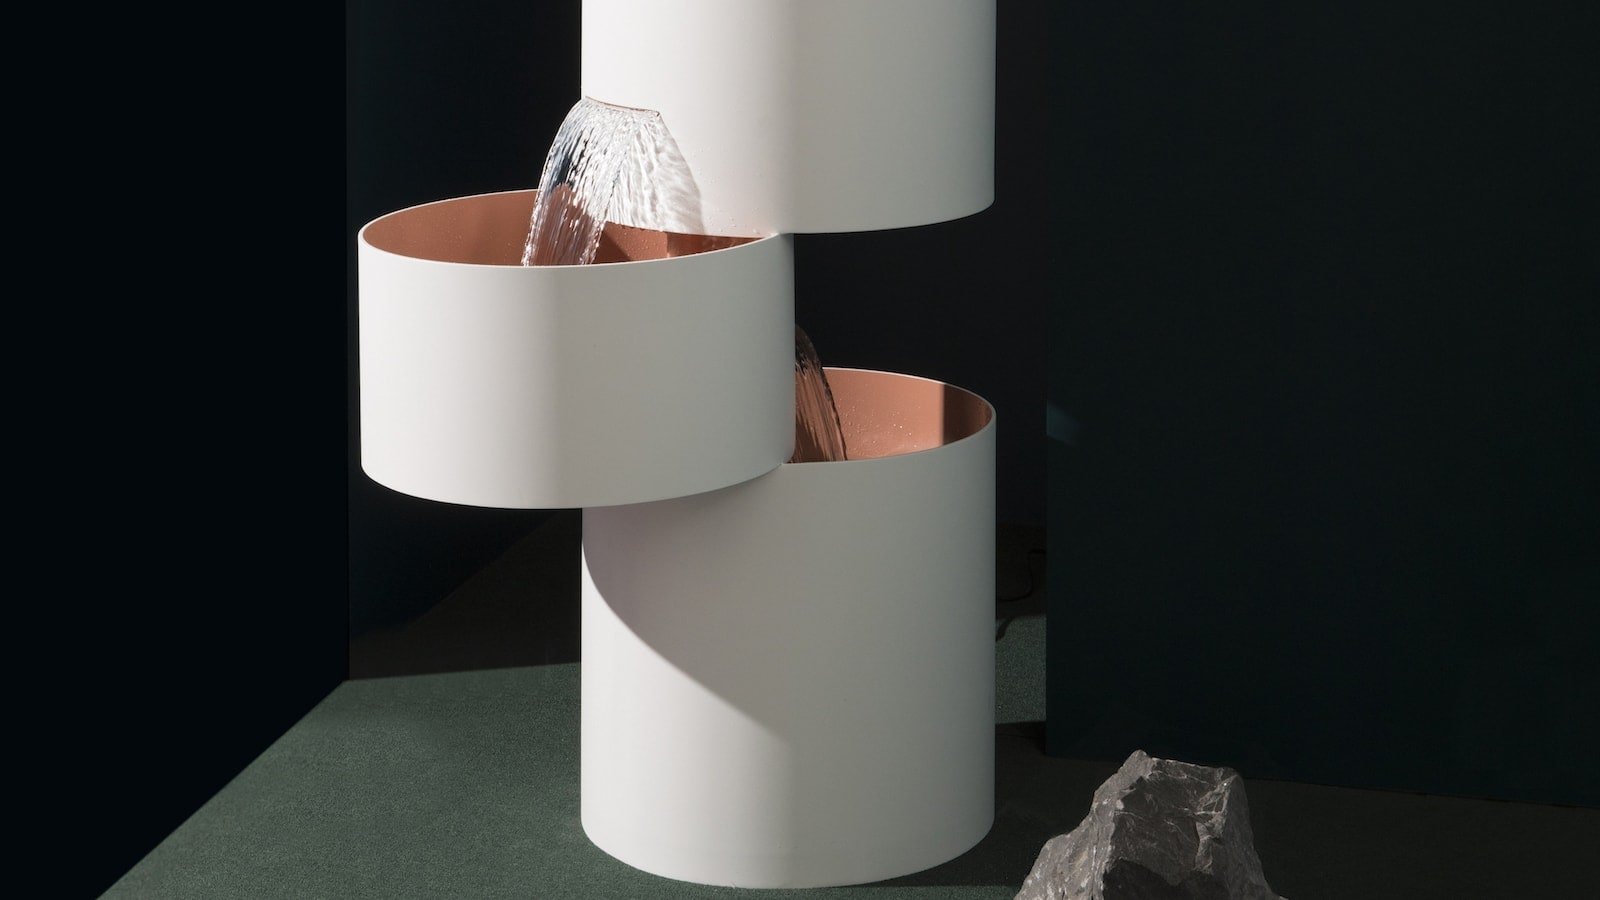 Bower Studios Pivot Fountain Limited Edition boasts a gentle stream of water from the top